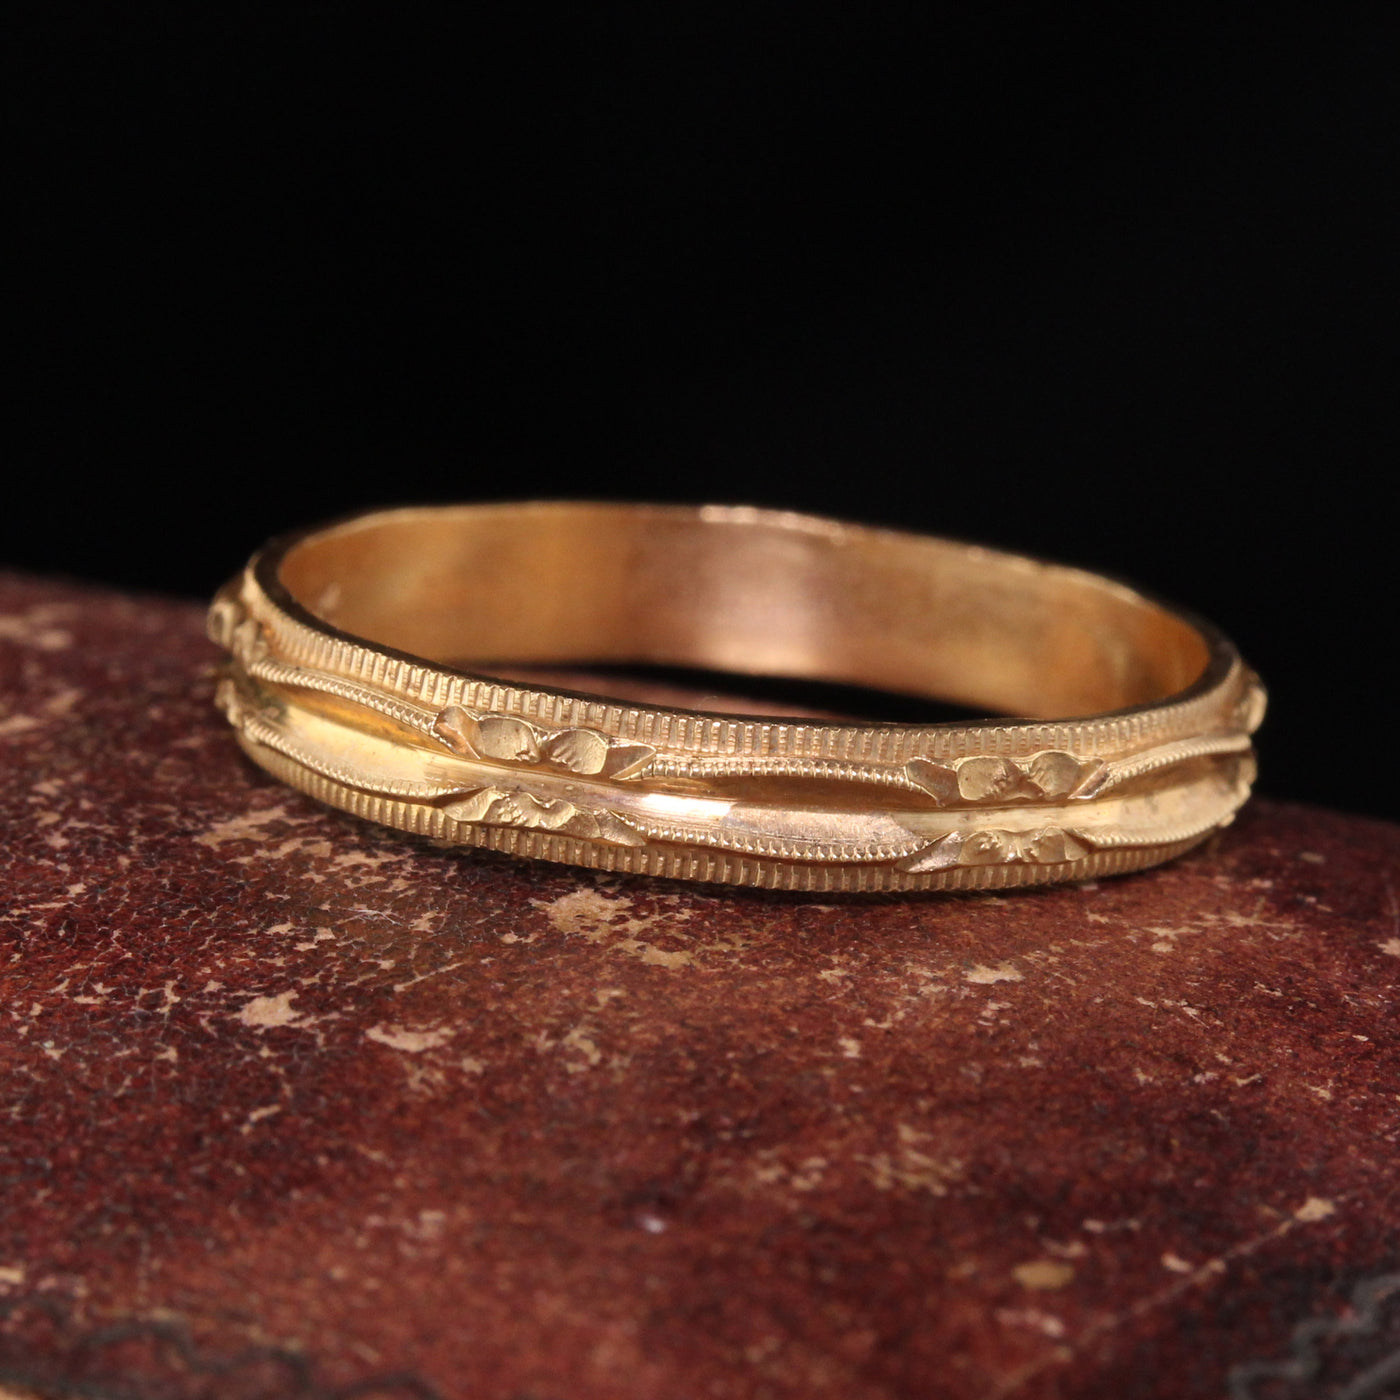 Antique Art Deco 14K Yellow Gold Engraved Wedding Band - Size 10 3/4